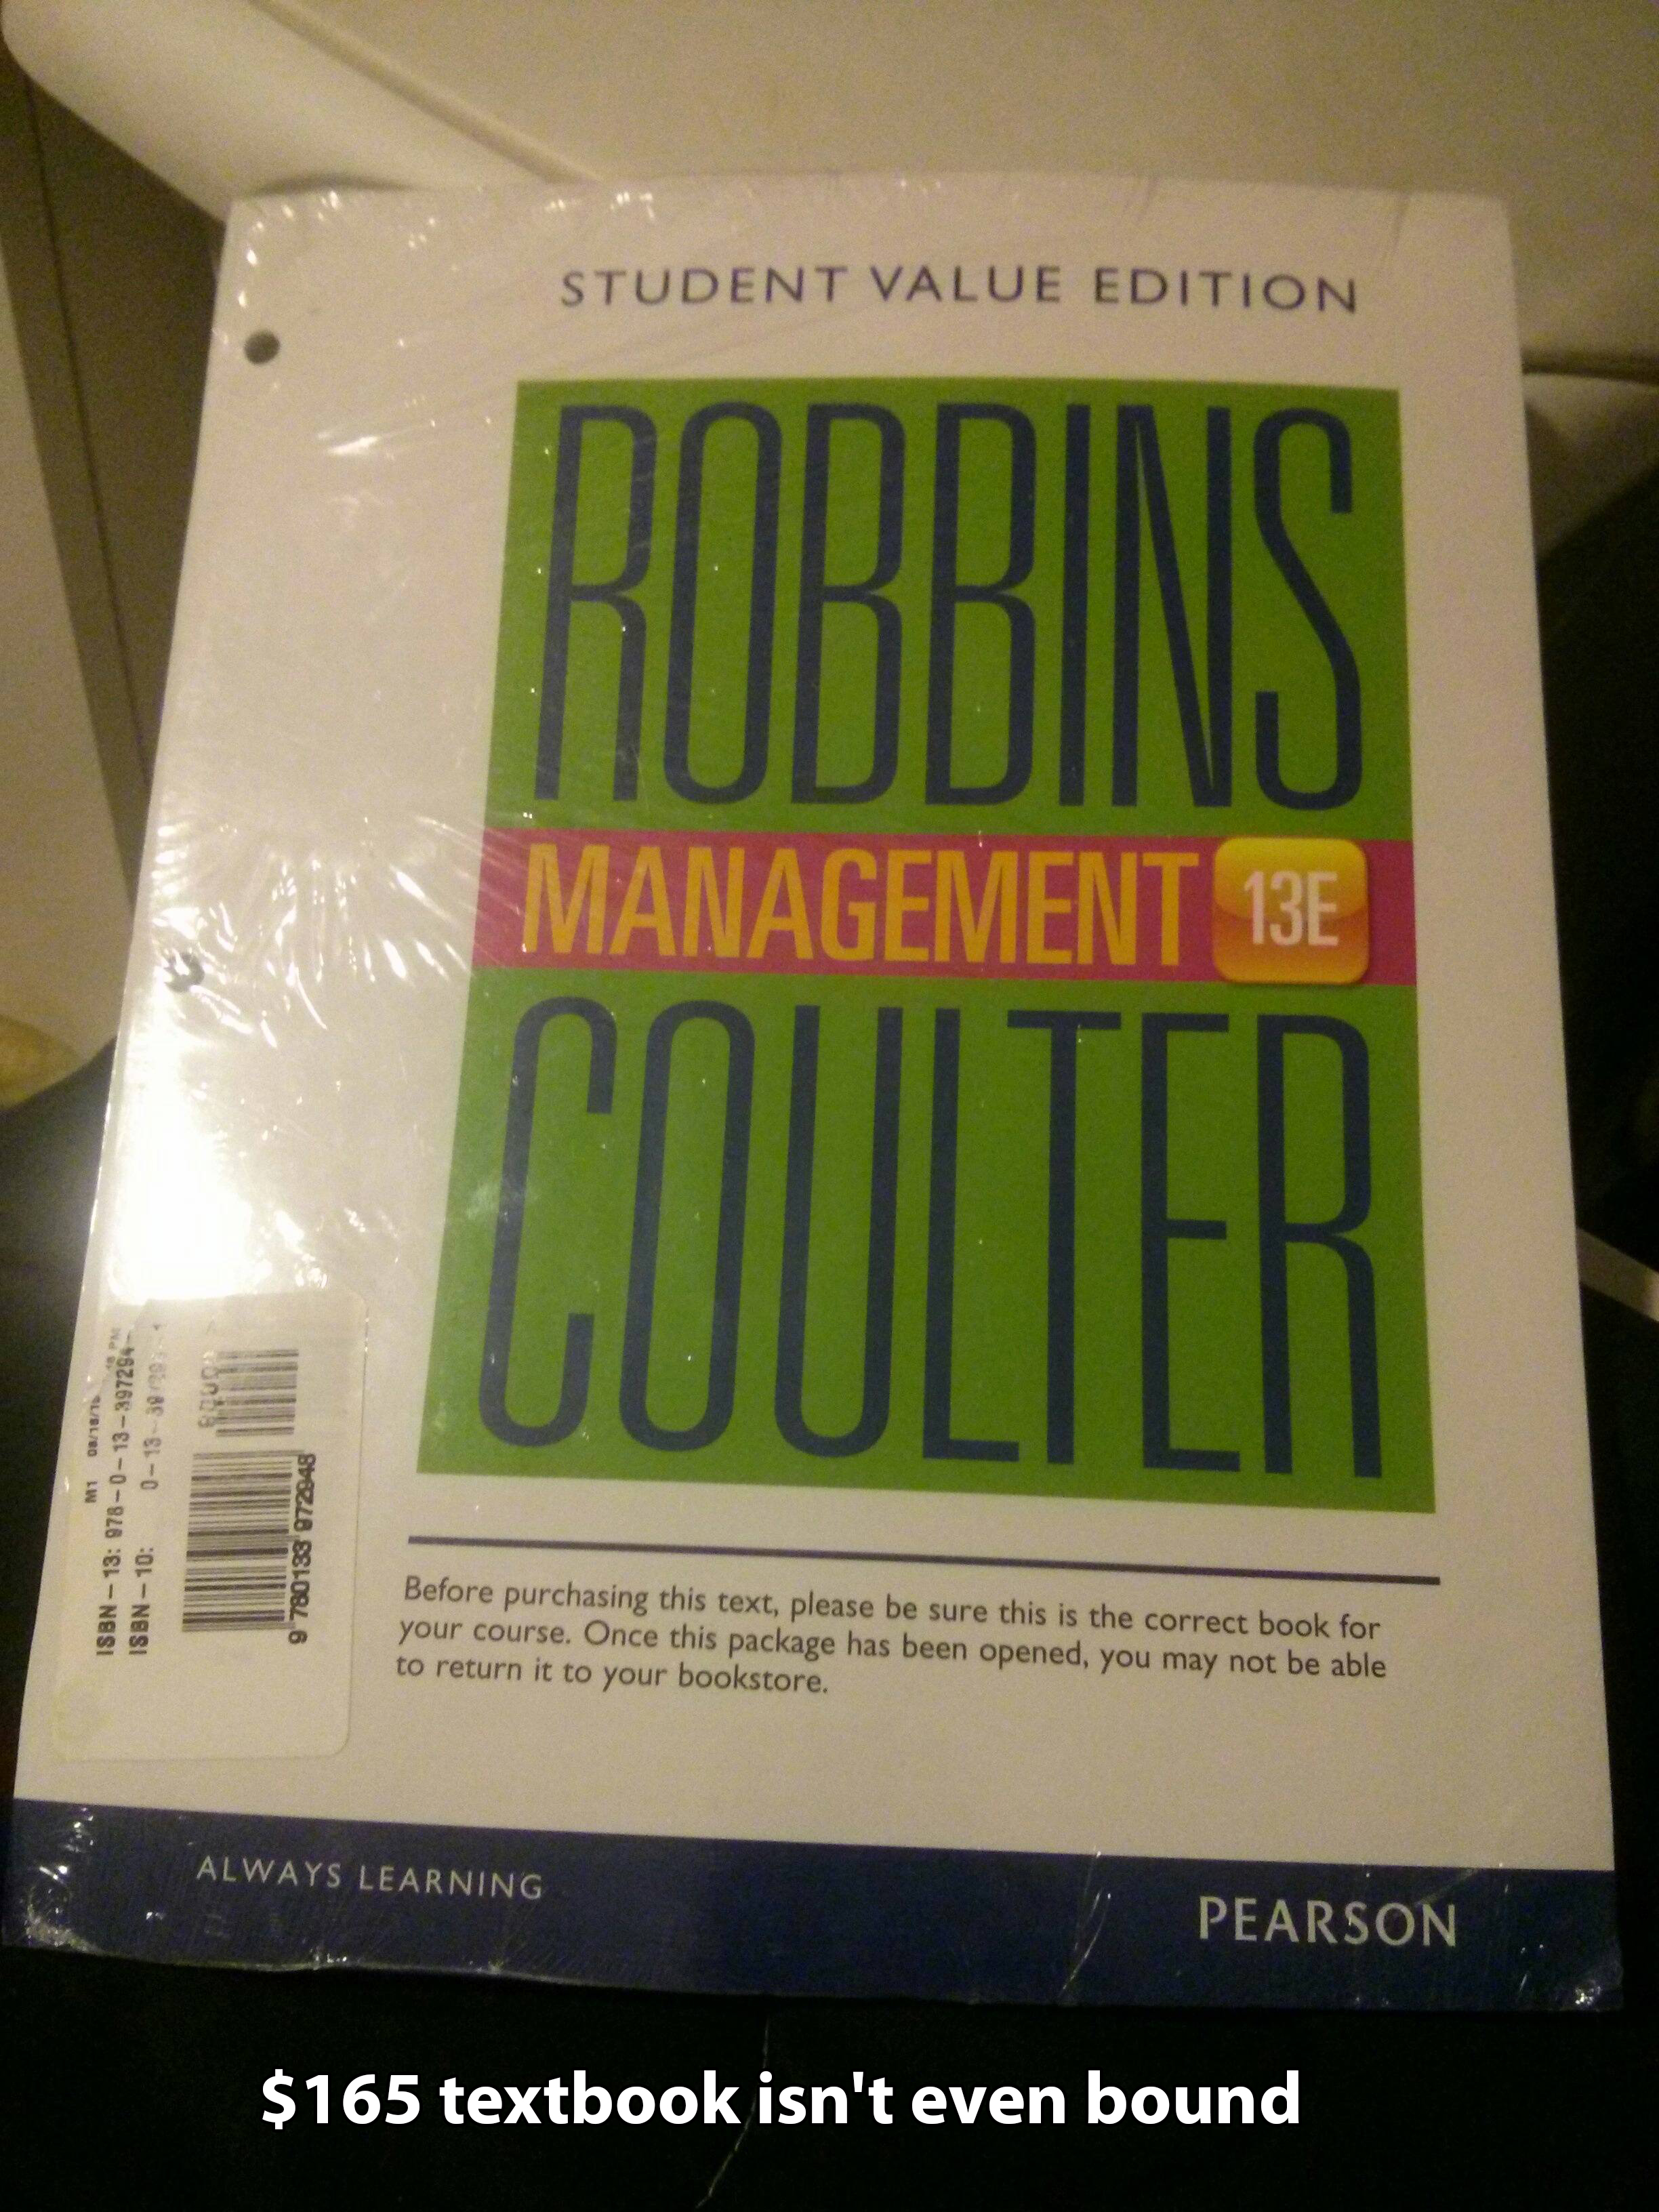 book - Student Value Edition Smanagement 13E Here purting this text e s your course Once the packages and to return it to your bookstore the correct book for you may not be able Always Learning Pearson $165 textbook isn't even bound